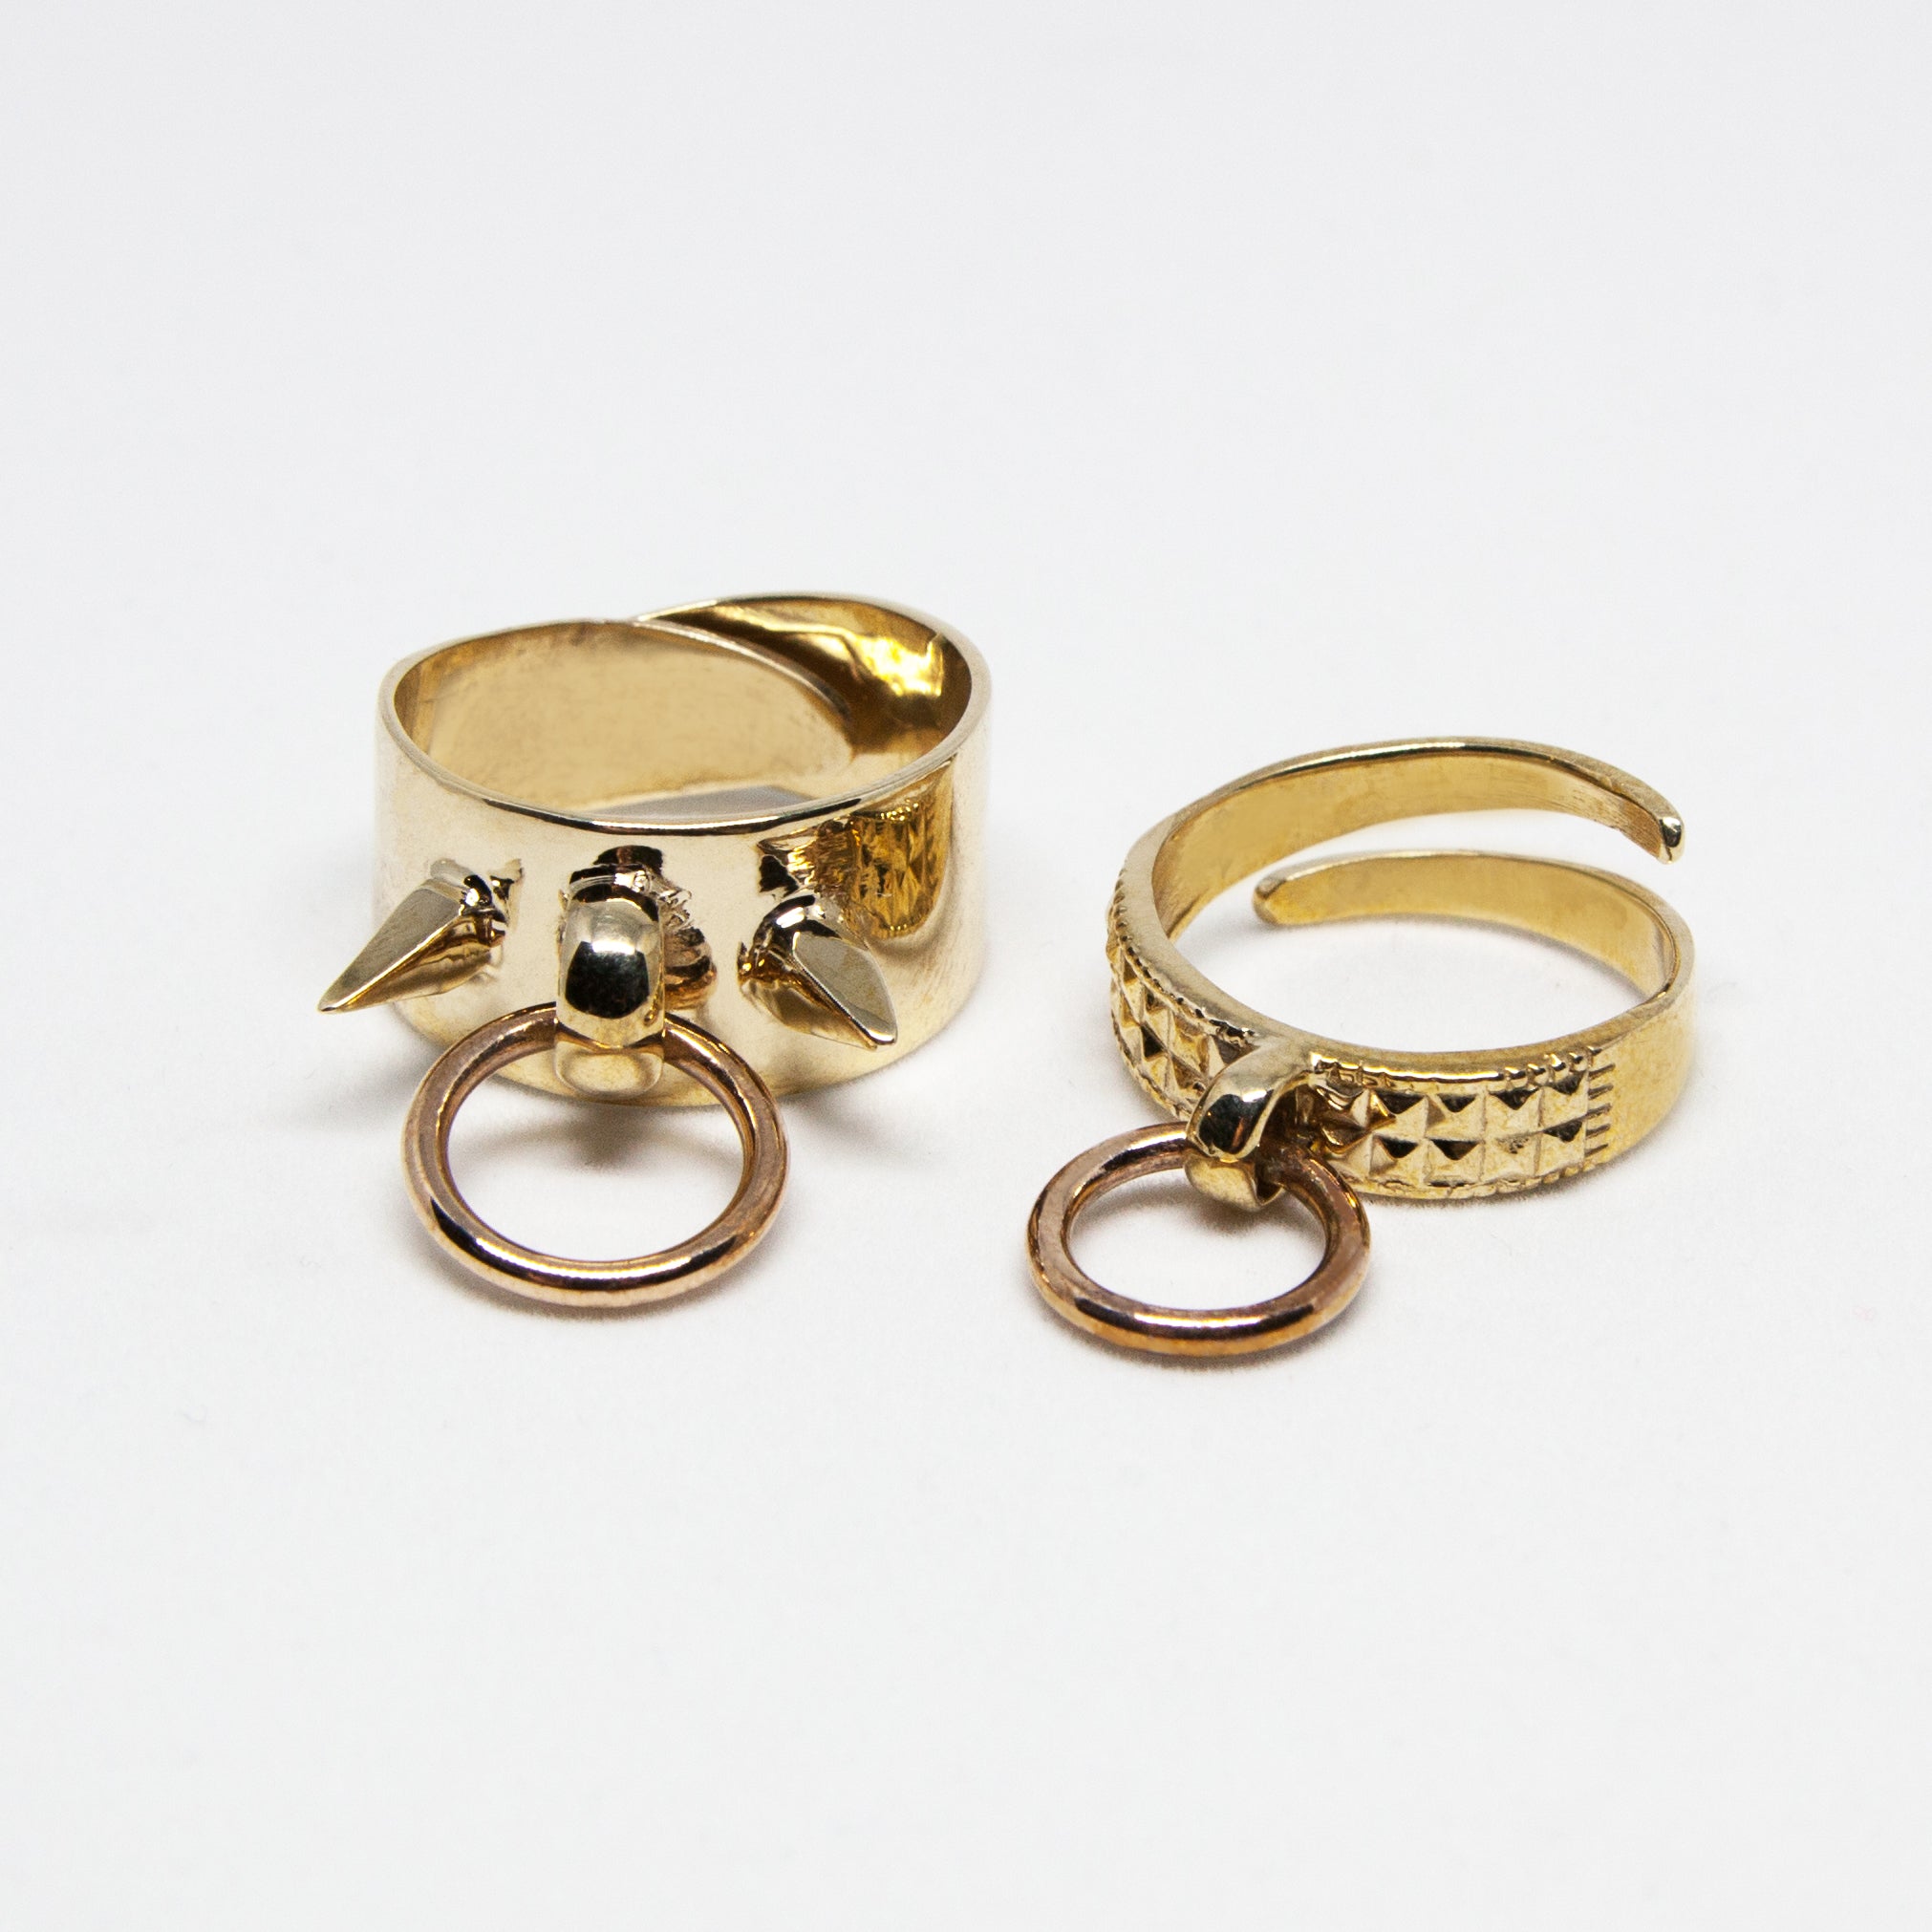 Bound Ring ((Studded)) *READY TO SHIP*